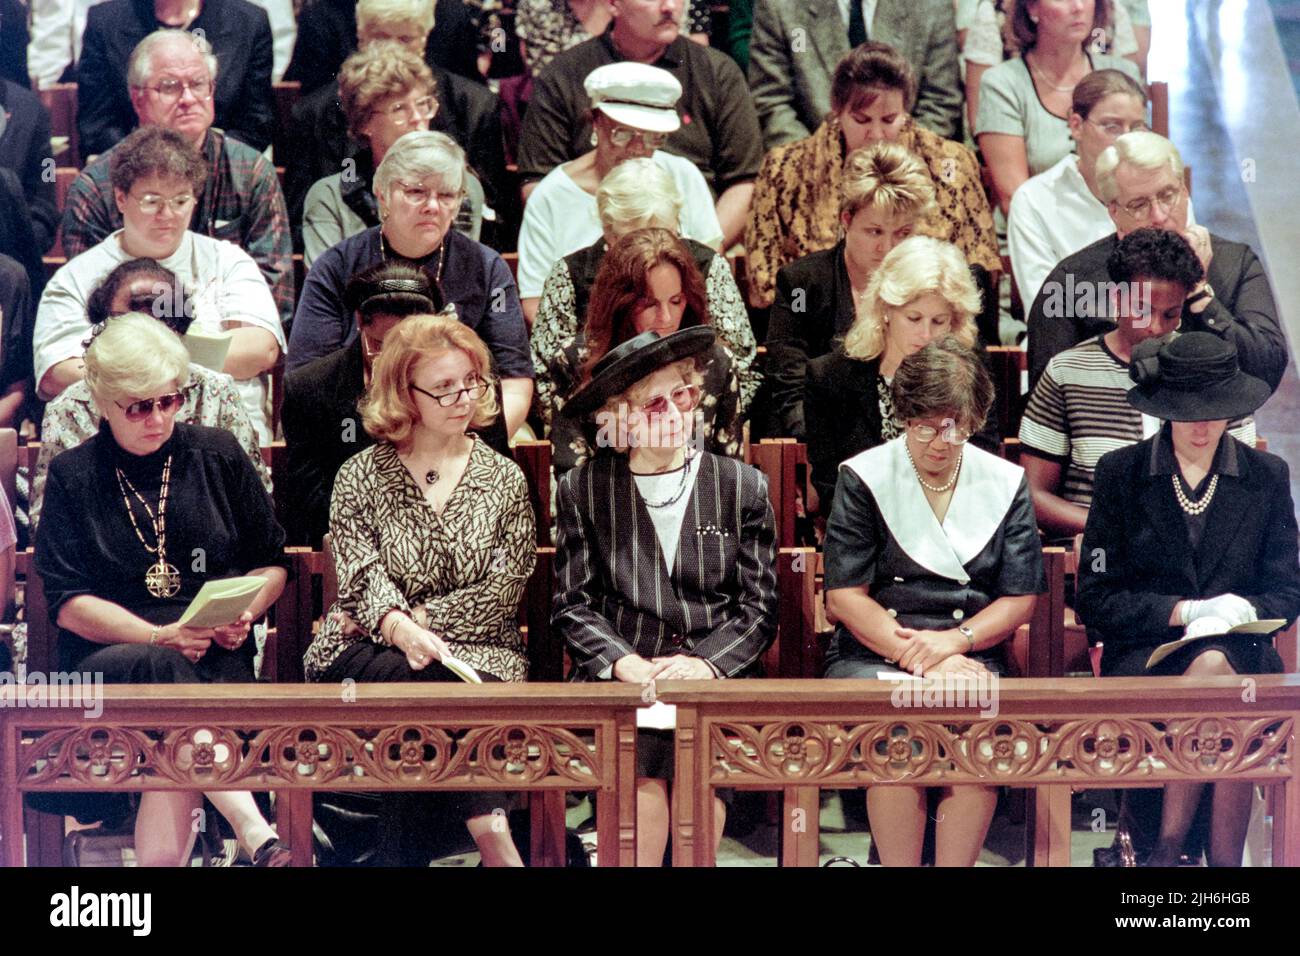 Members of the public gallery listen to the service during a memorial and prayer service to Diana, the Princess of Wales, on the occasion of her death at the Washington National Cathedral, September 6, 1997, in Washington, D.C. Stock Photo